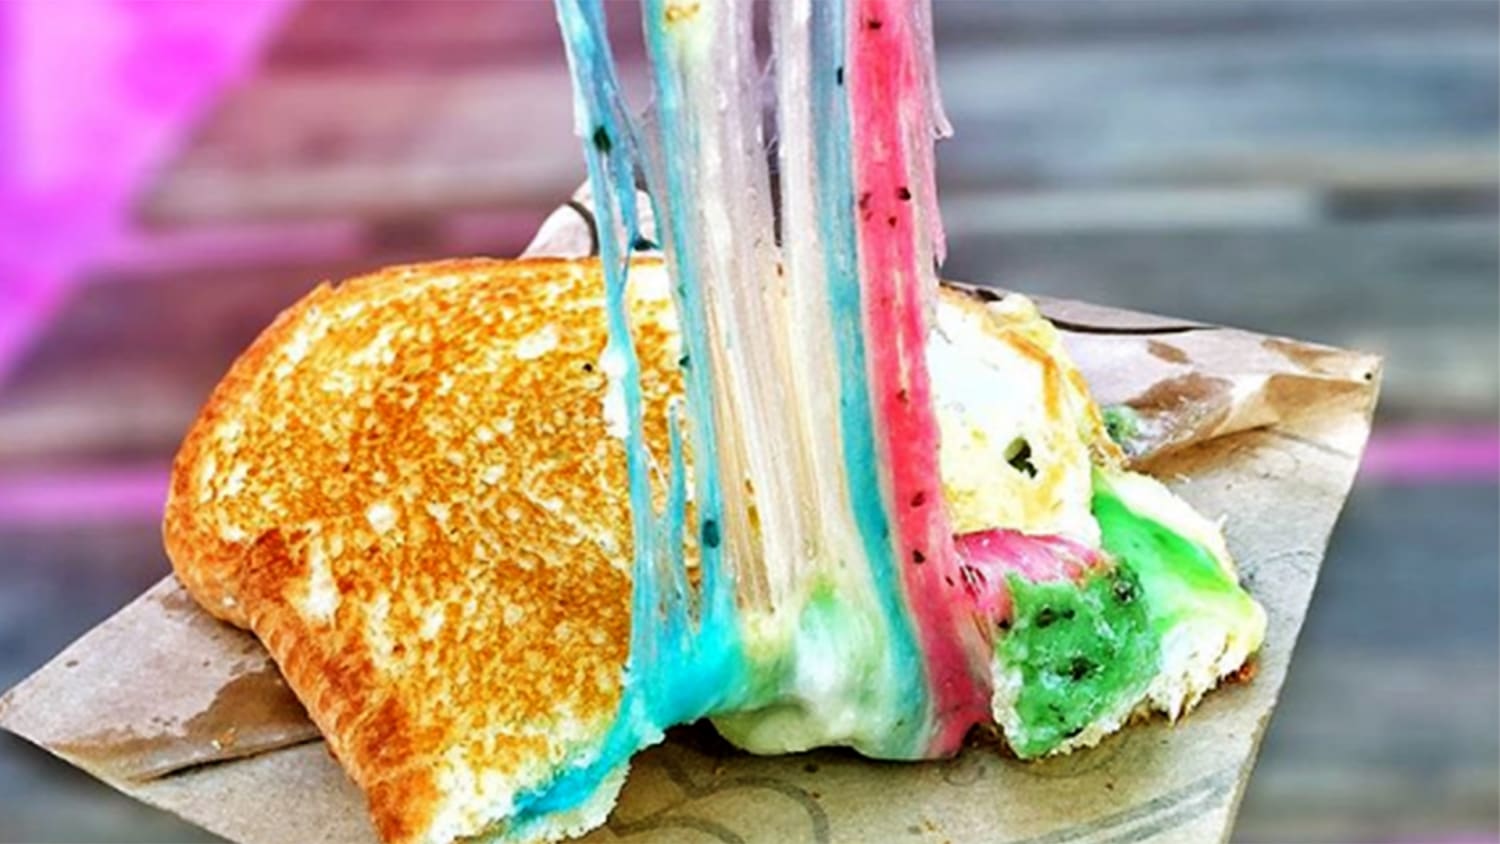 Rainbow grilled cheese sandwiches are going viral